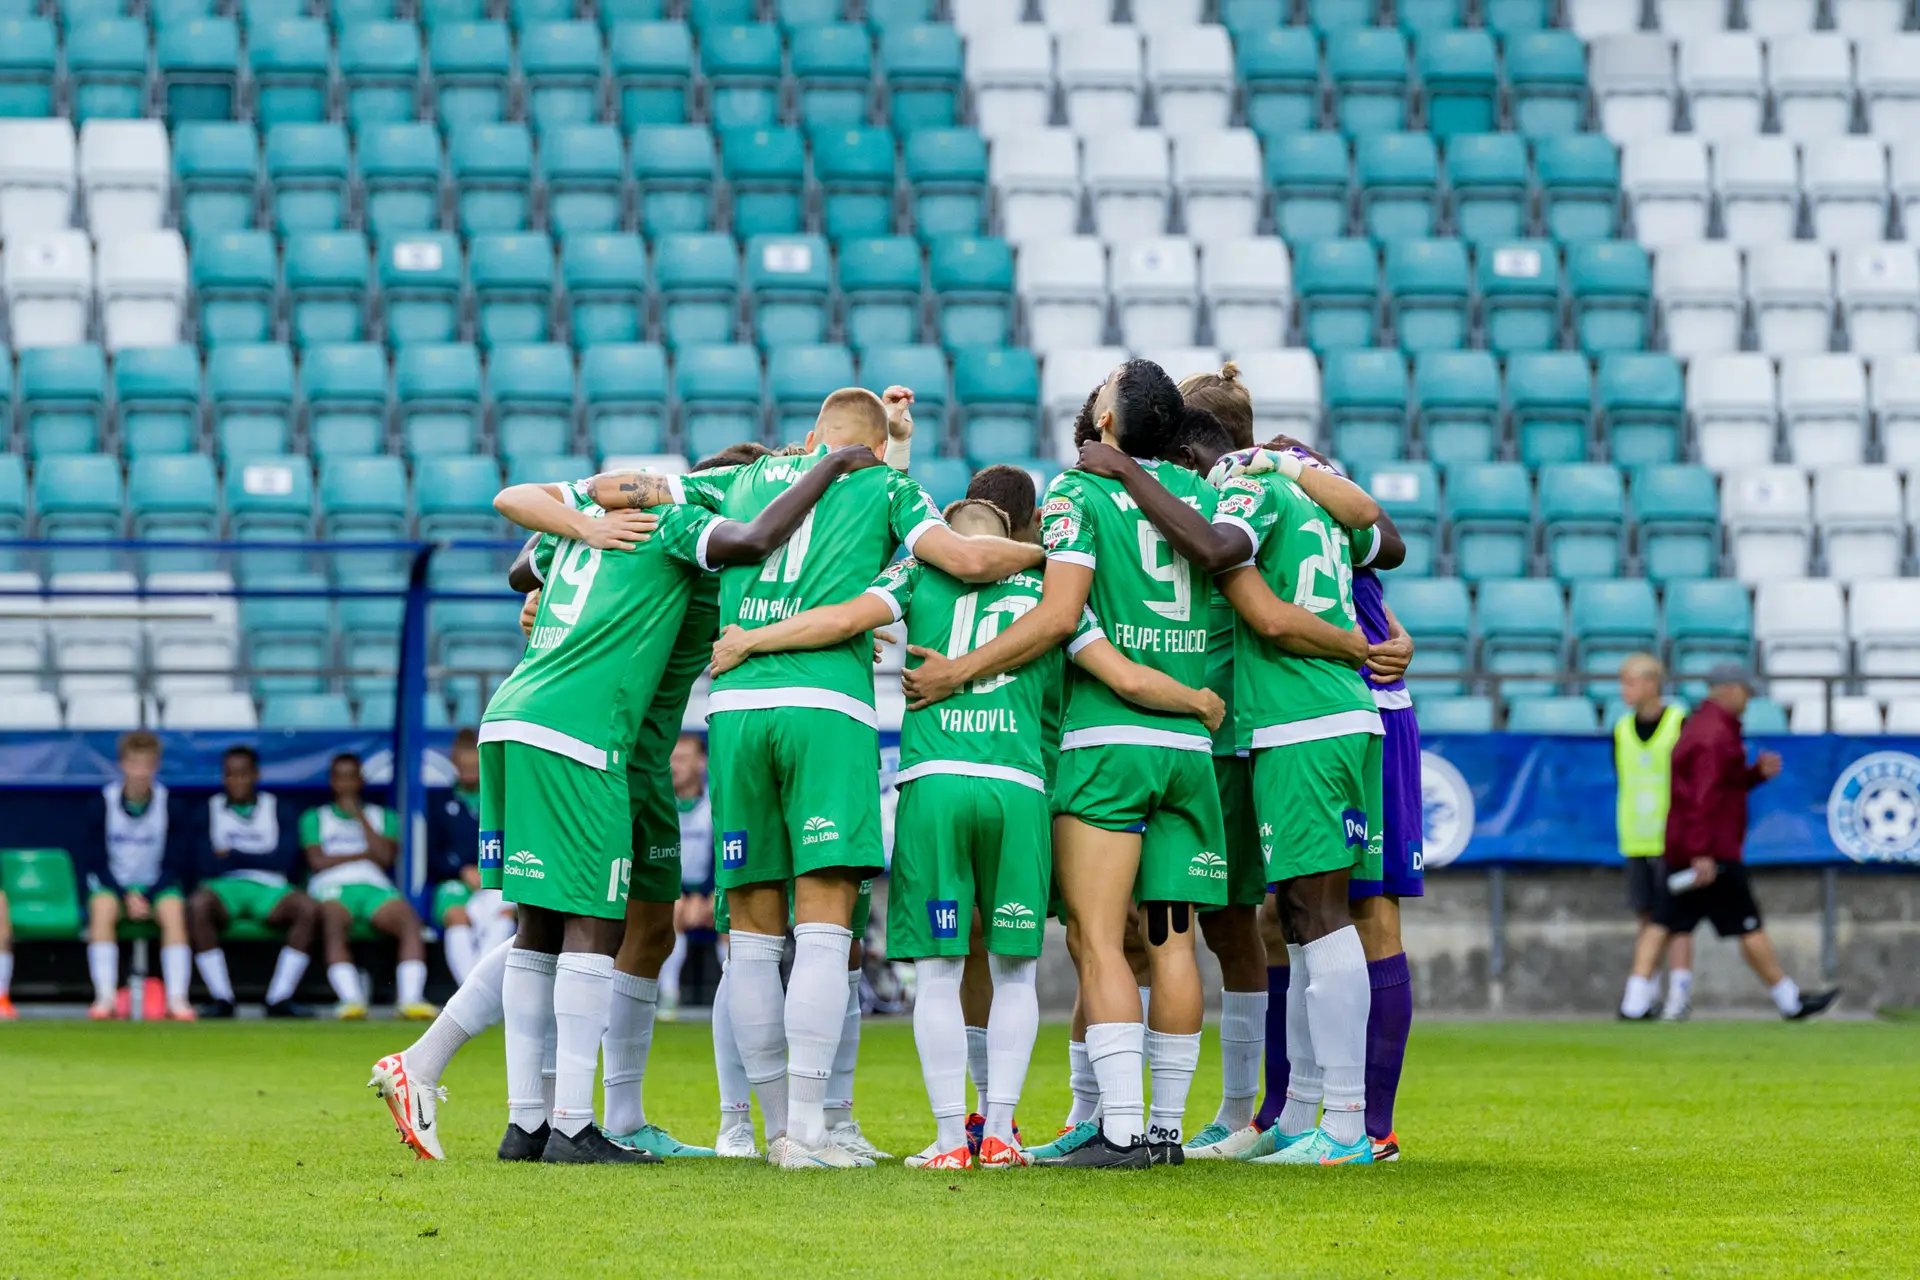 FCI Levadia opens their Conference League second qualifying round in Croatia tomorrow